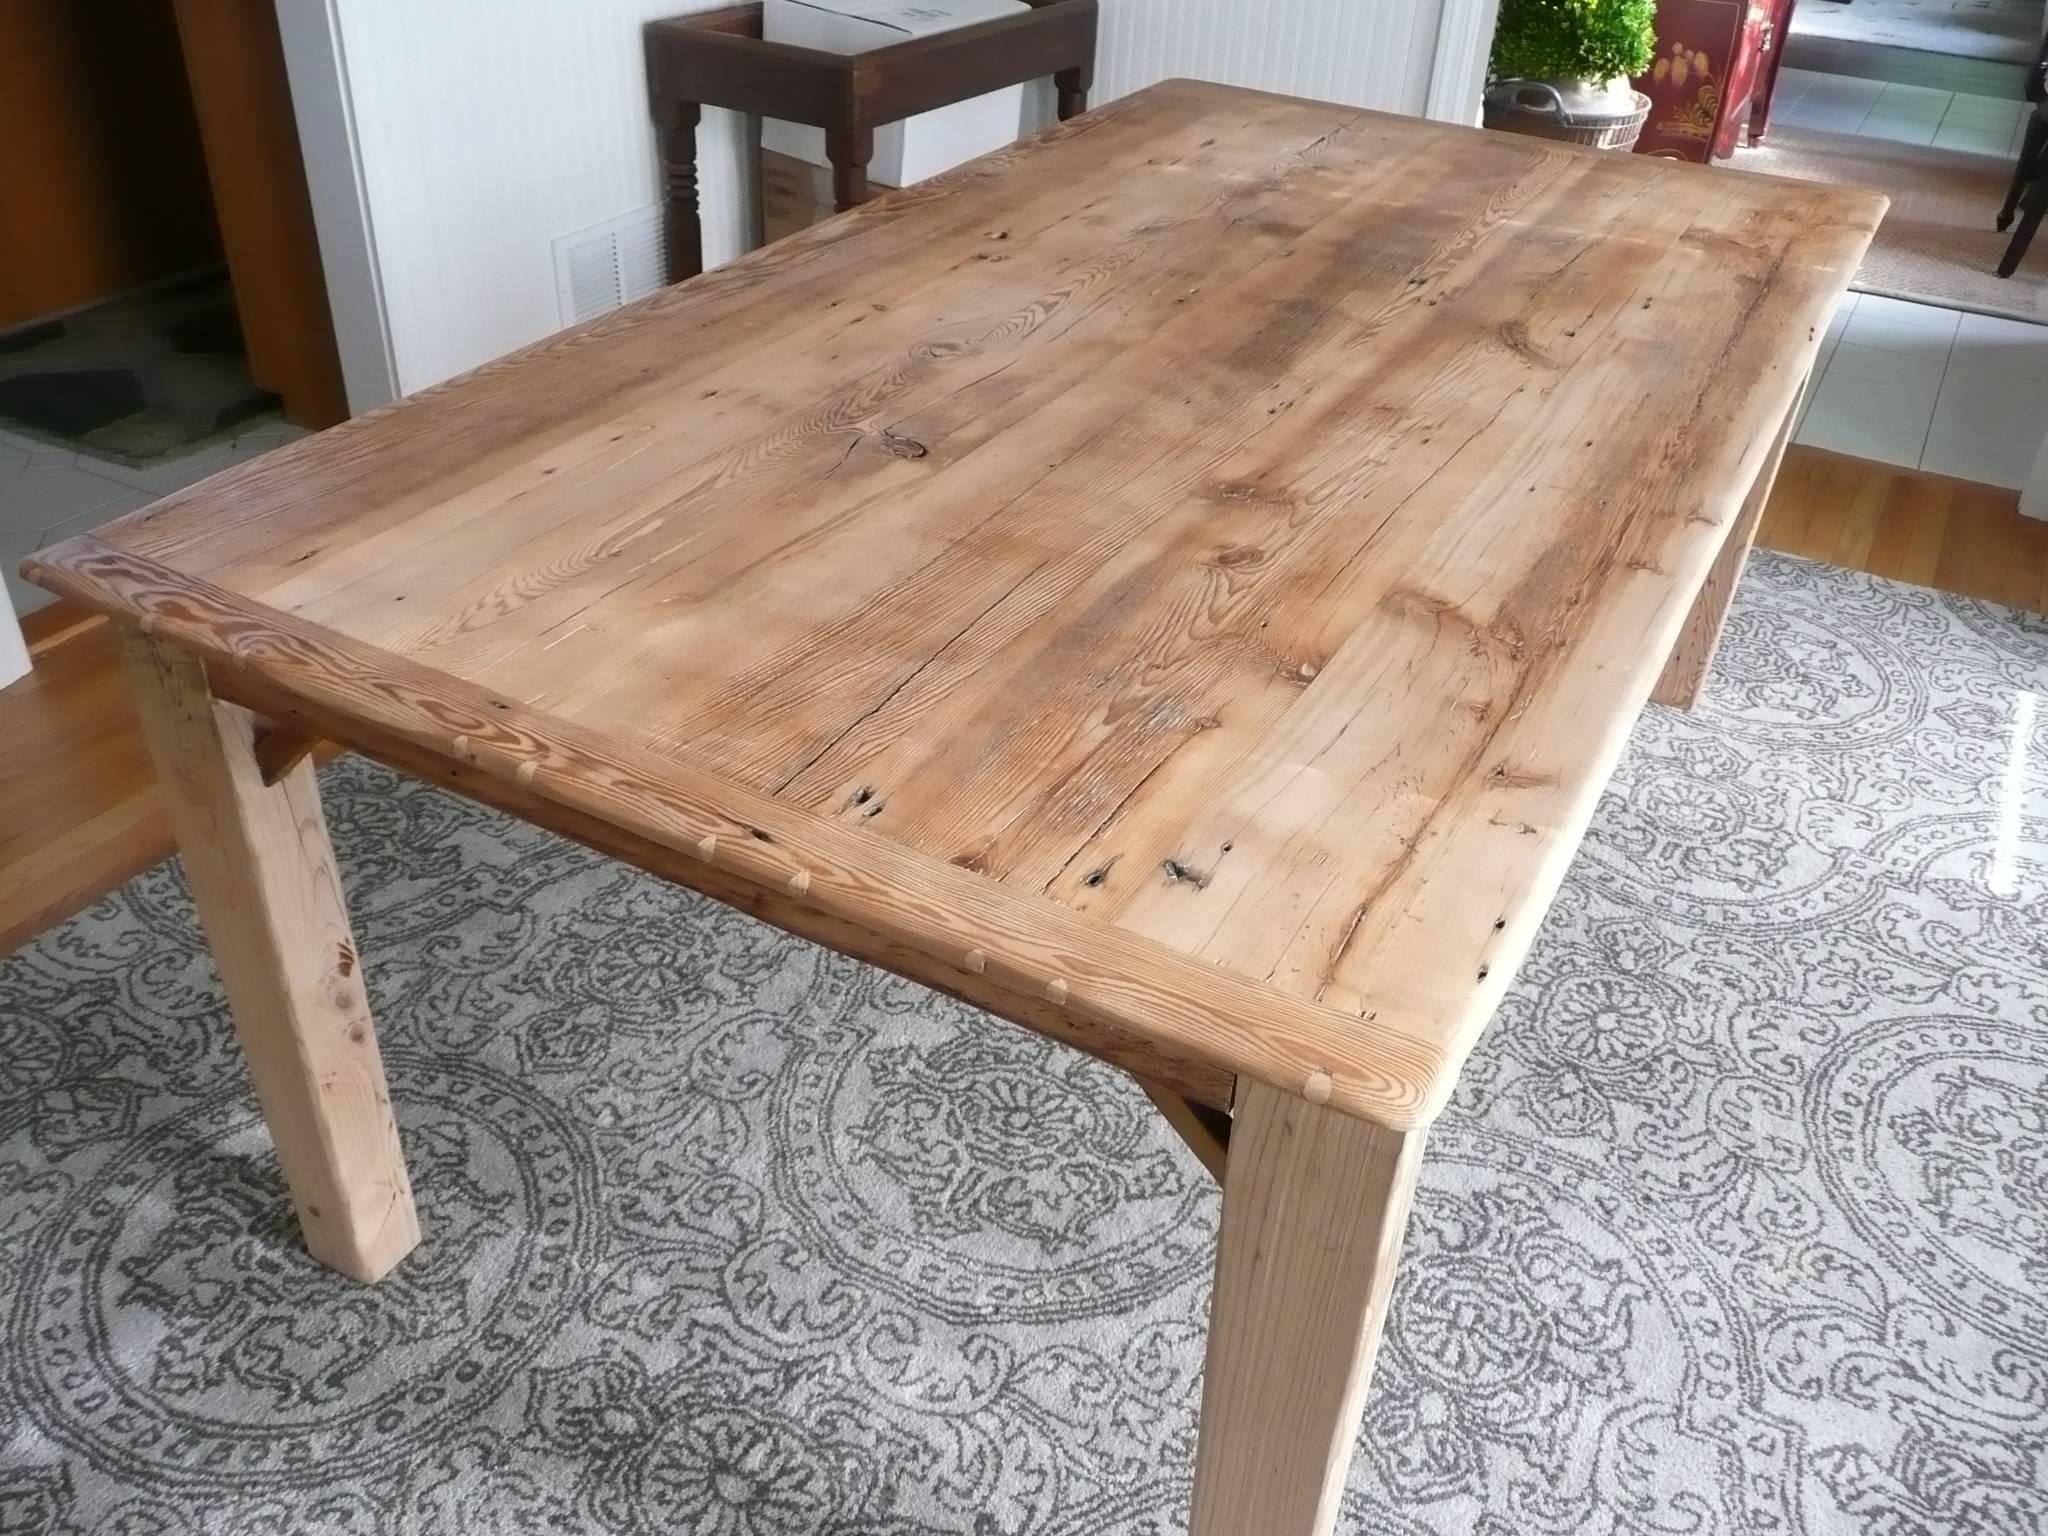 Beautiful 100 year old Vermont reclaimed barnwood is expertly crafted into a large natural color rectangular farm table with solid wood tapered legs from same source, having rubbed paste wax finish.